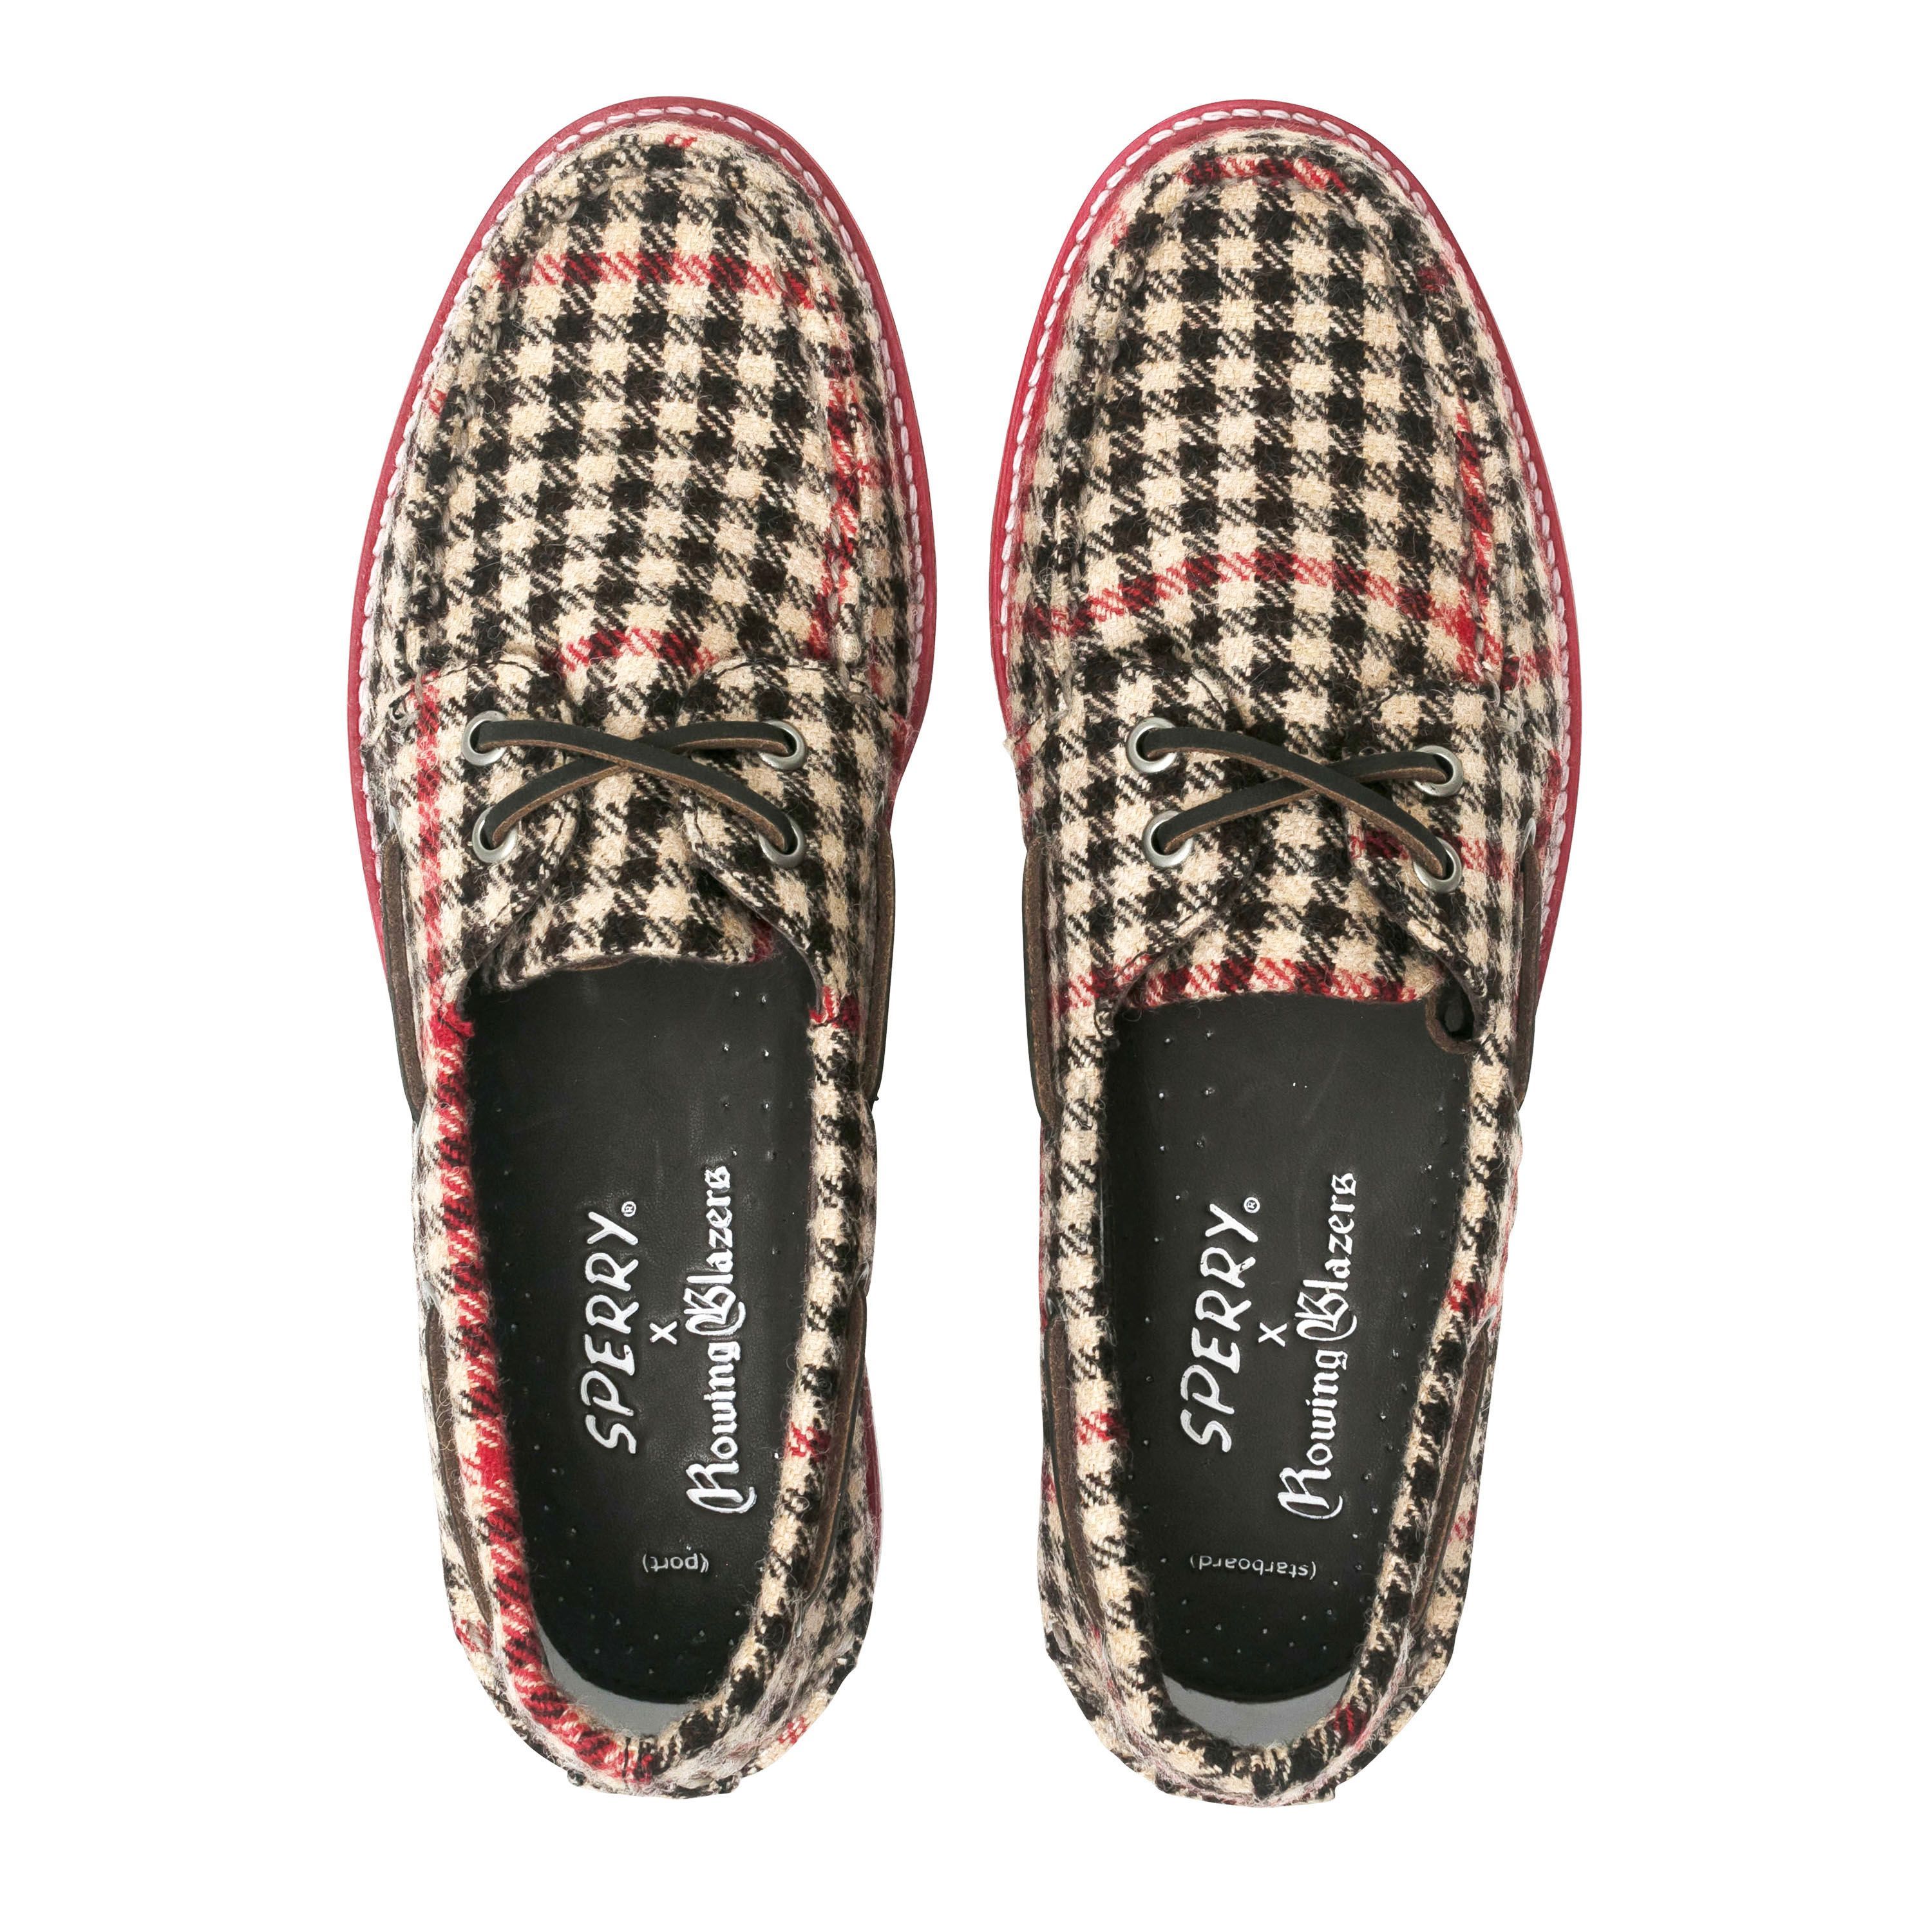 mr rogers sperry shoes